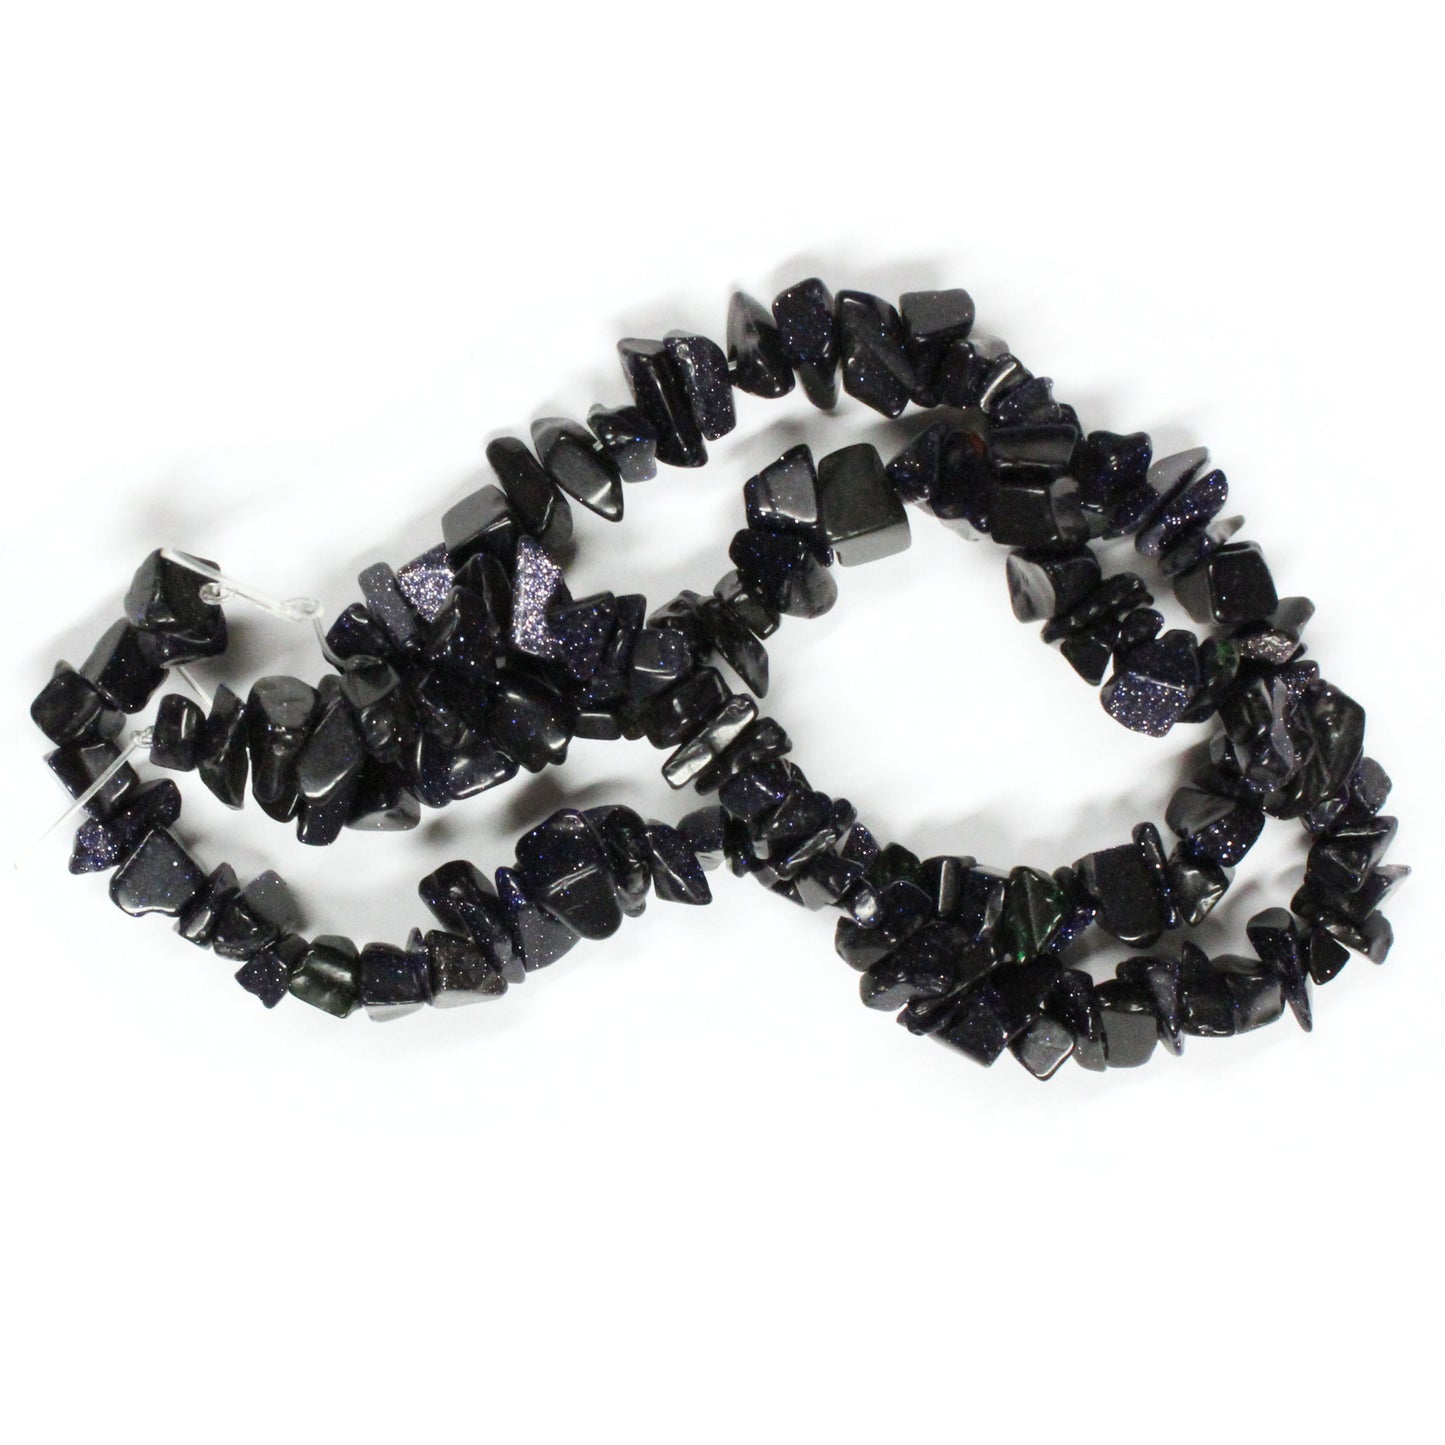 Blue Sand Stone Chip Beads / 16 Inch strand / 5-10mm chips / color coated / opaque glossy polished stone